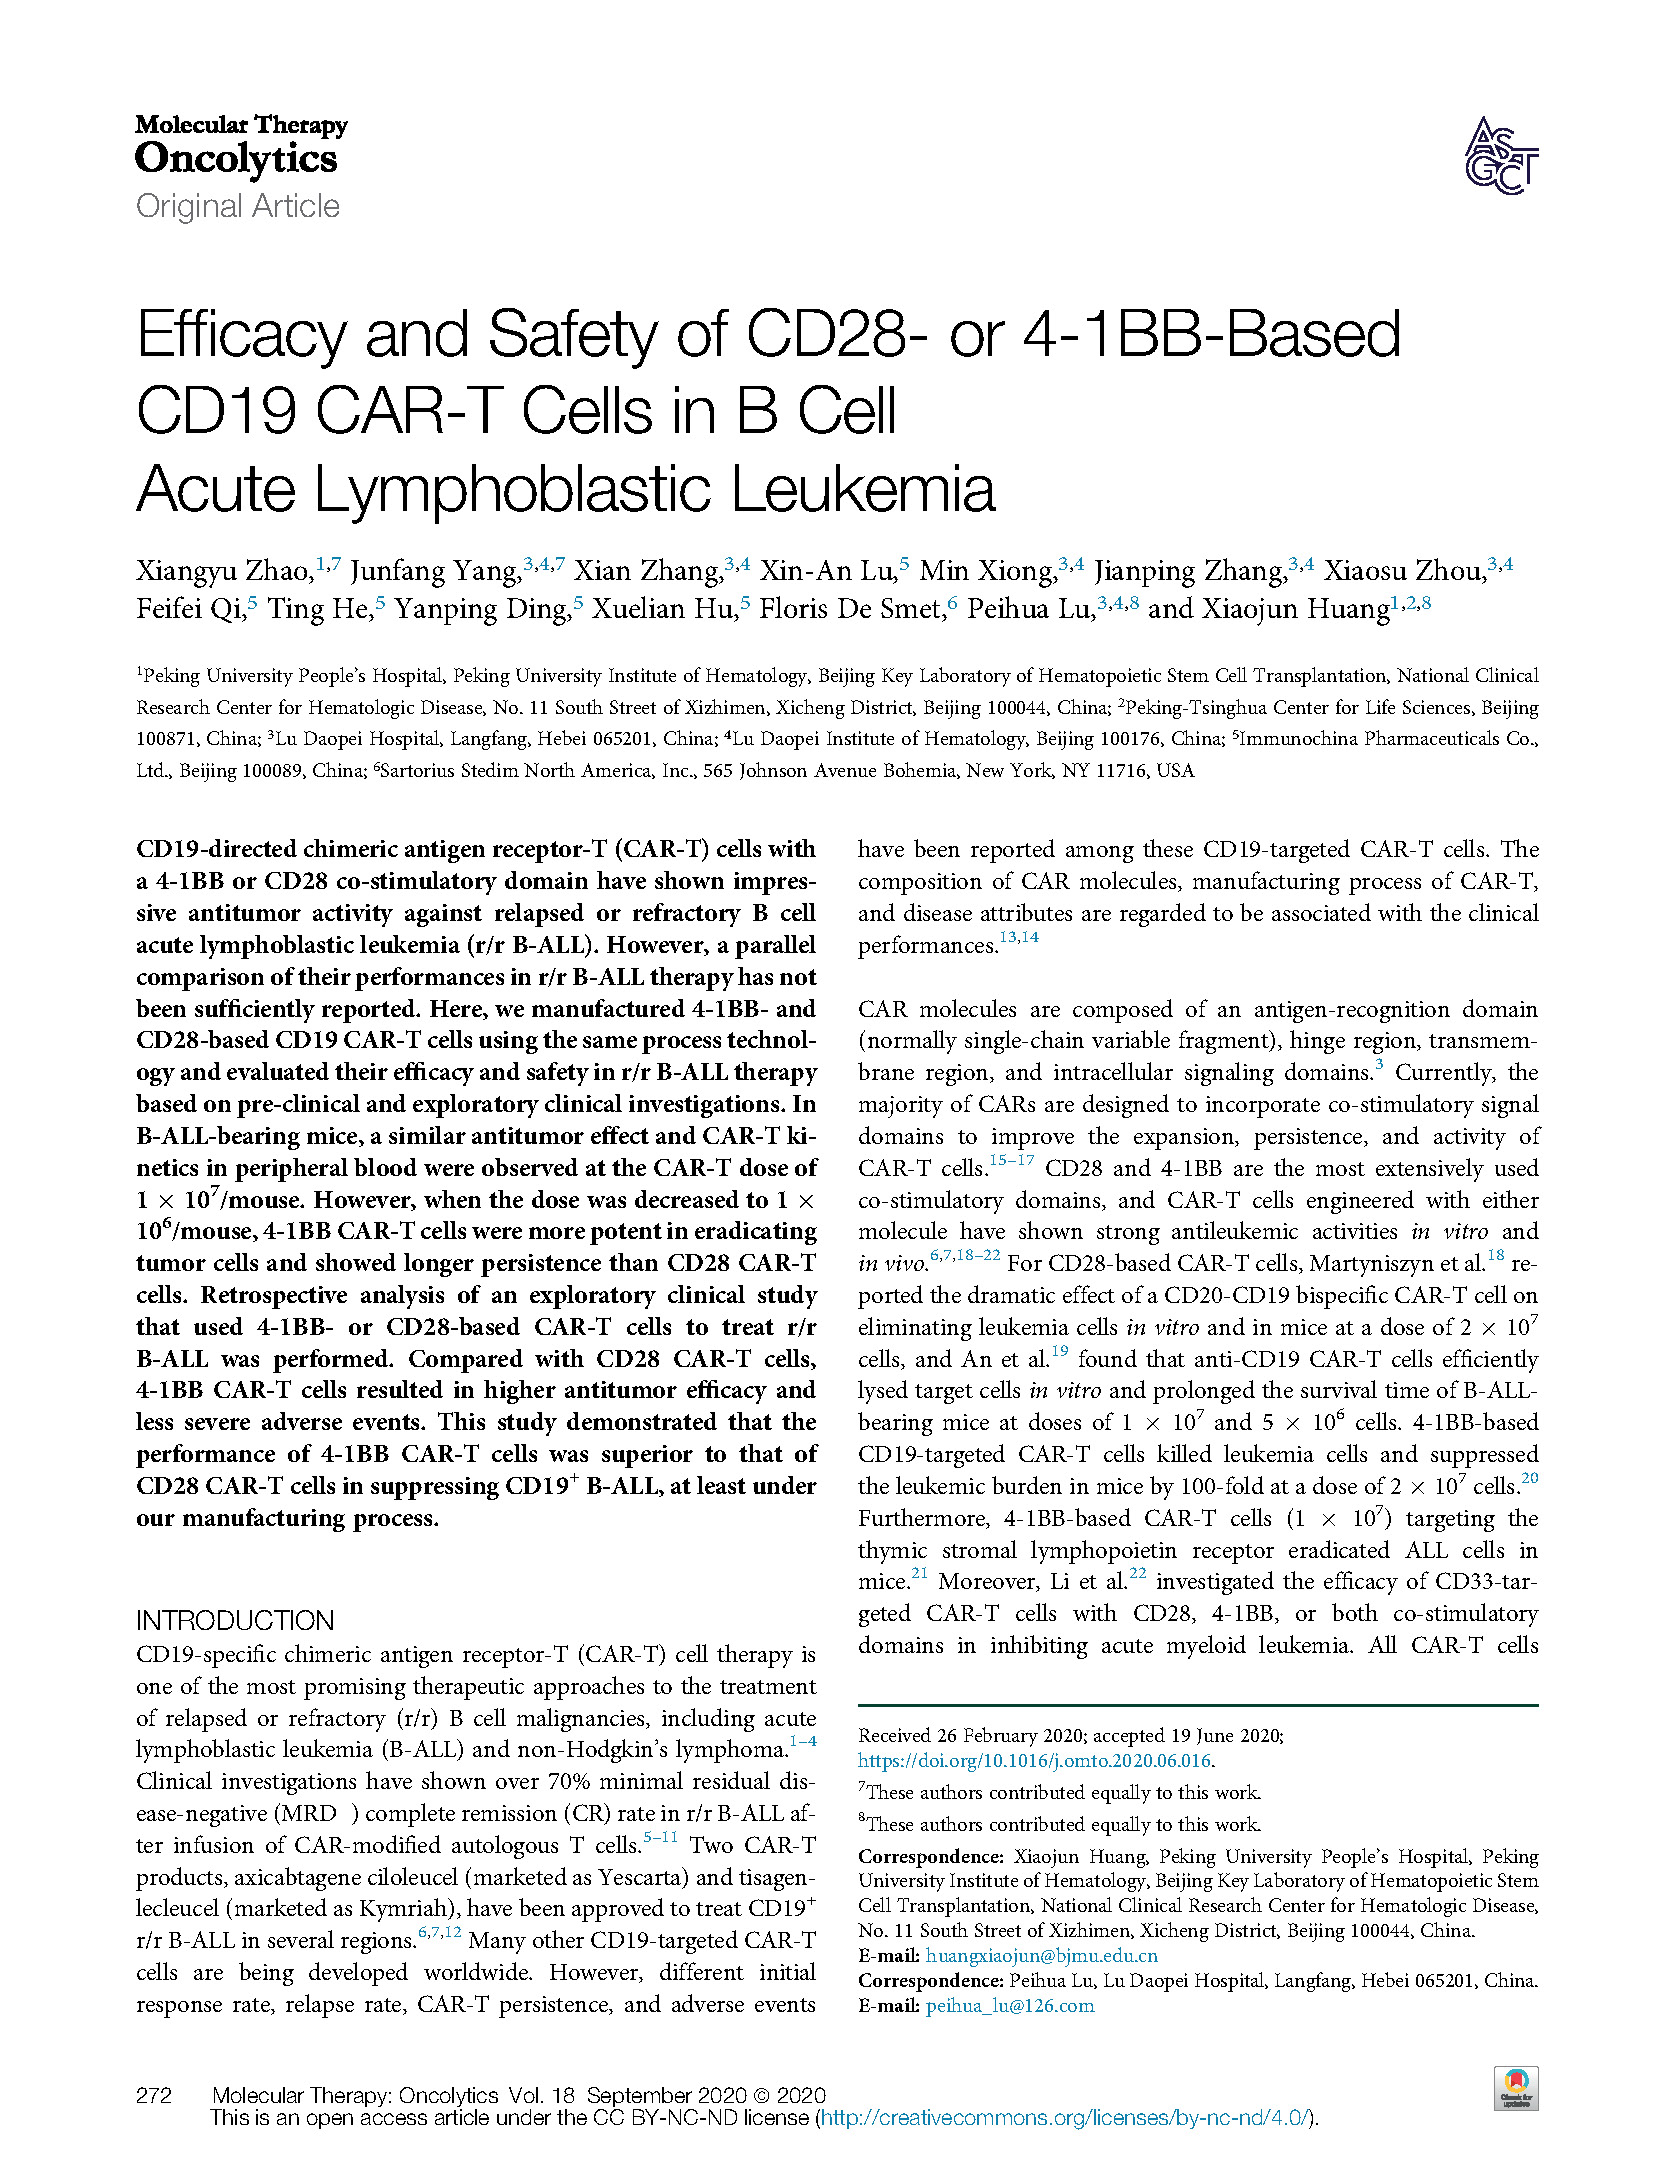 2020-Efficacy and Safety of CD28- or 4-1BB-Based CD19 CAR-T Cells in B Cell Acute Lymphoblastic Leukemia.jpg